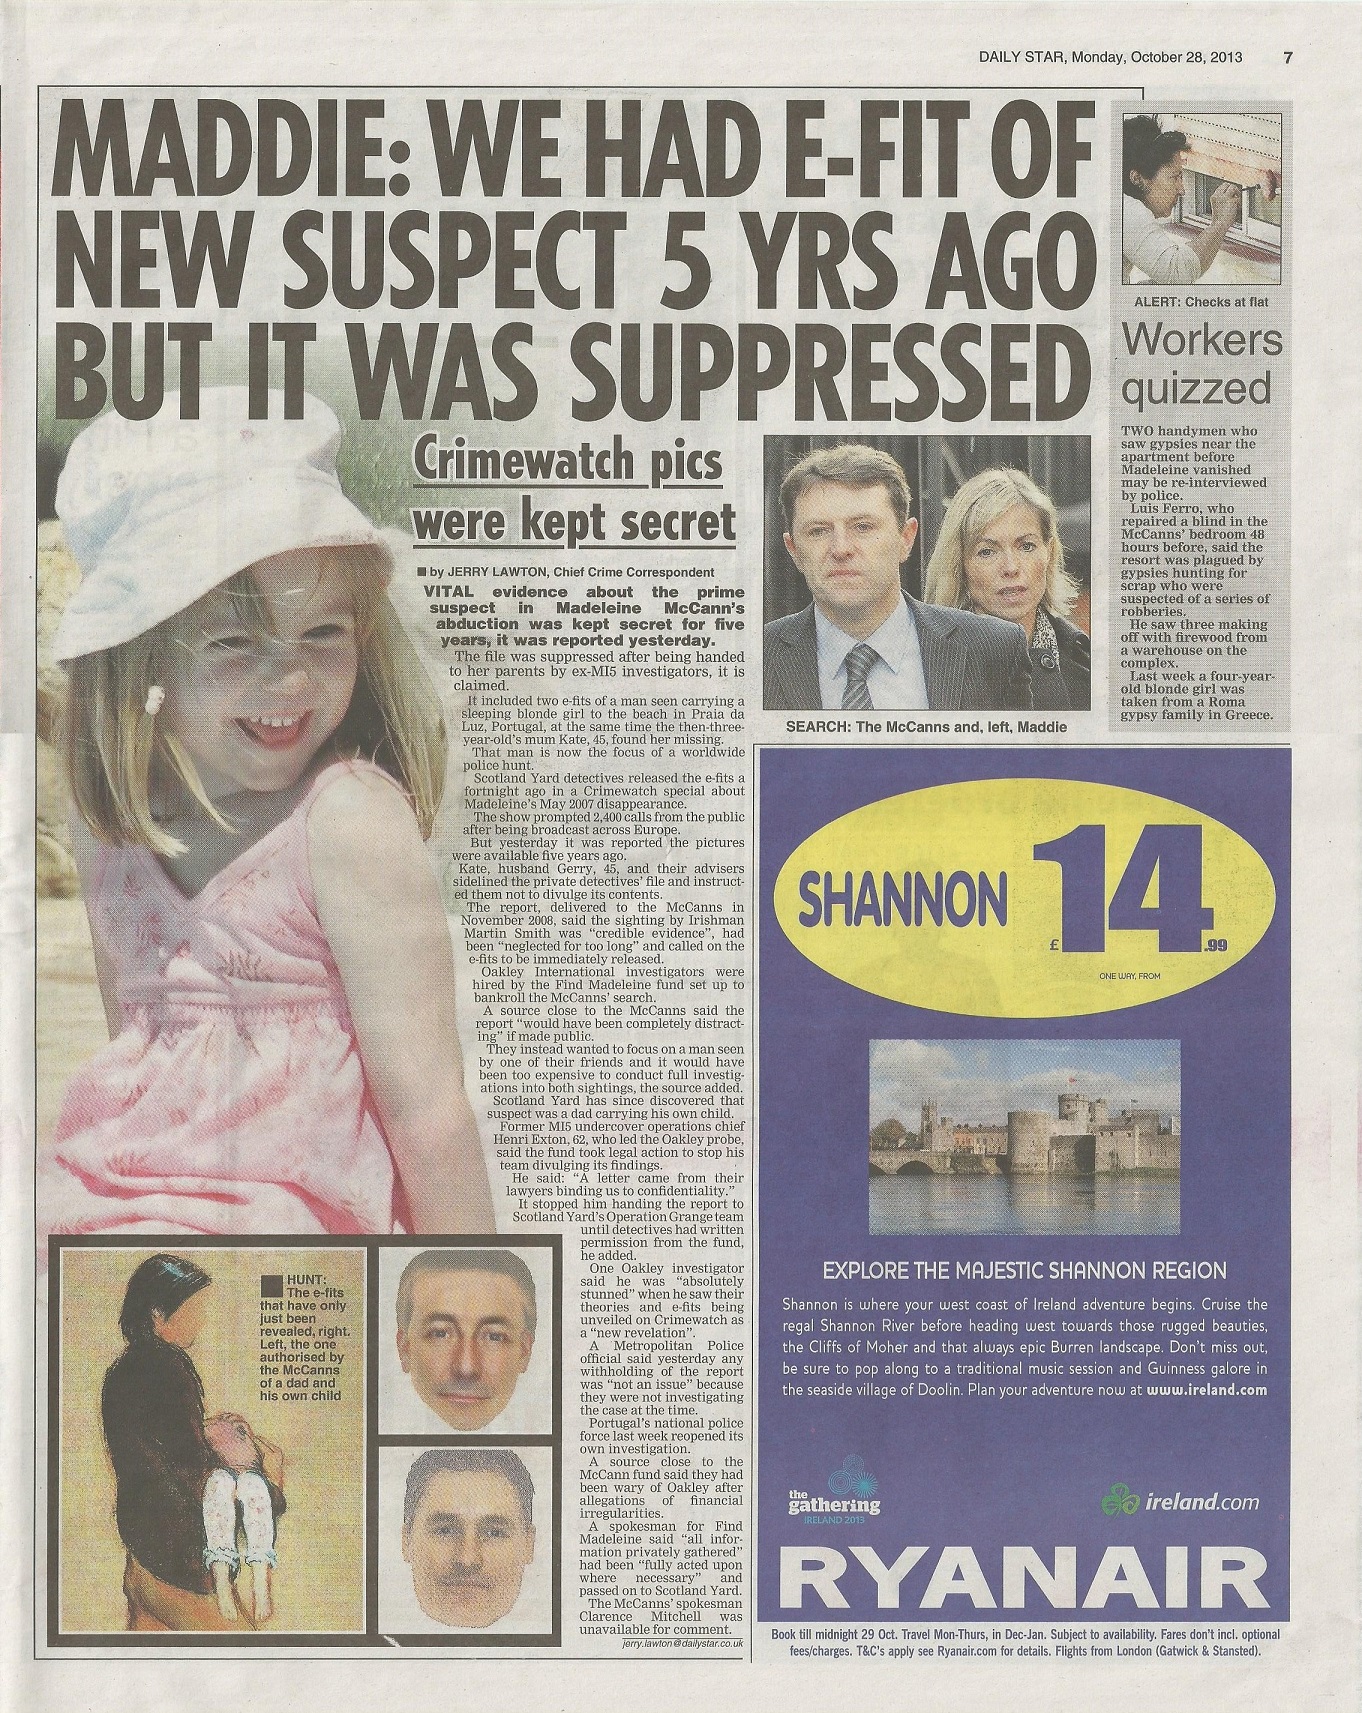 Daily Star, paper edition, page 7: 'MADDIE: WE HAD E-FIT OF NEW SUSPECT 5 YRS AGO BUT IT WAS SUPPRESSED', 28 October 2013